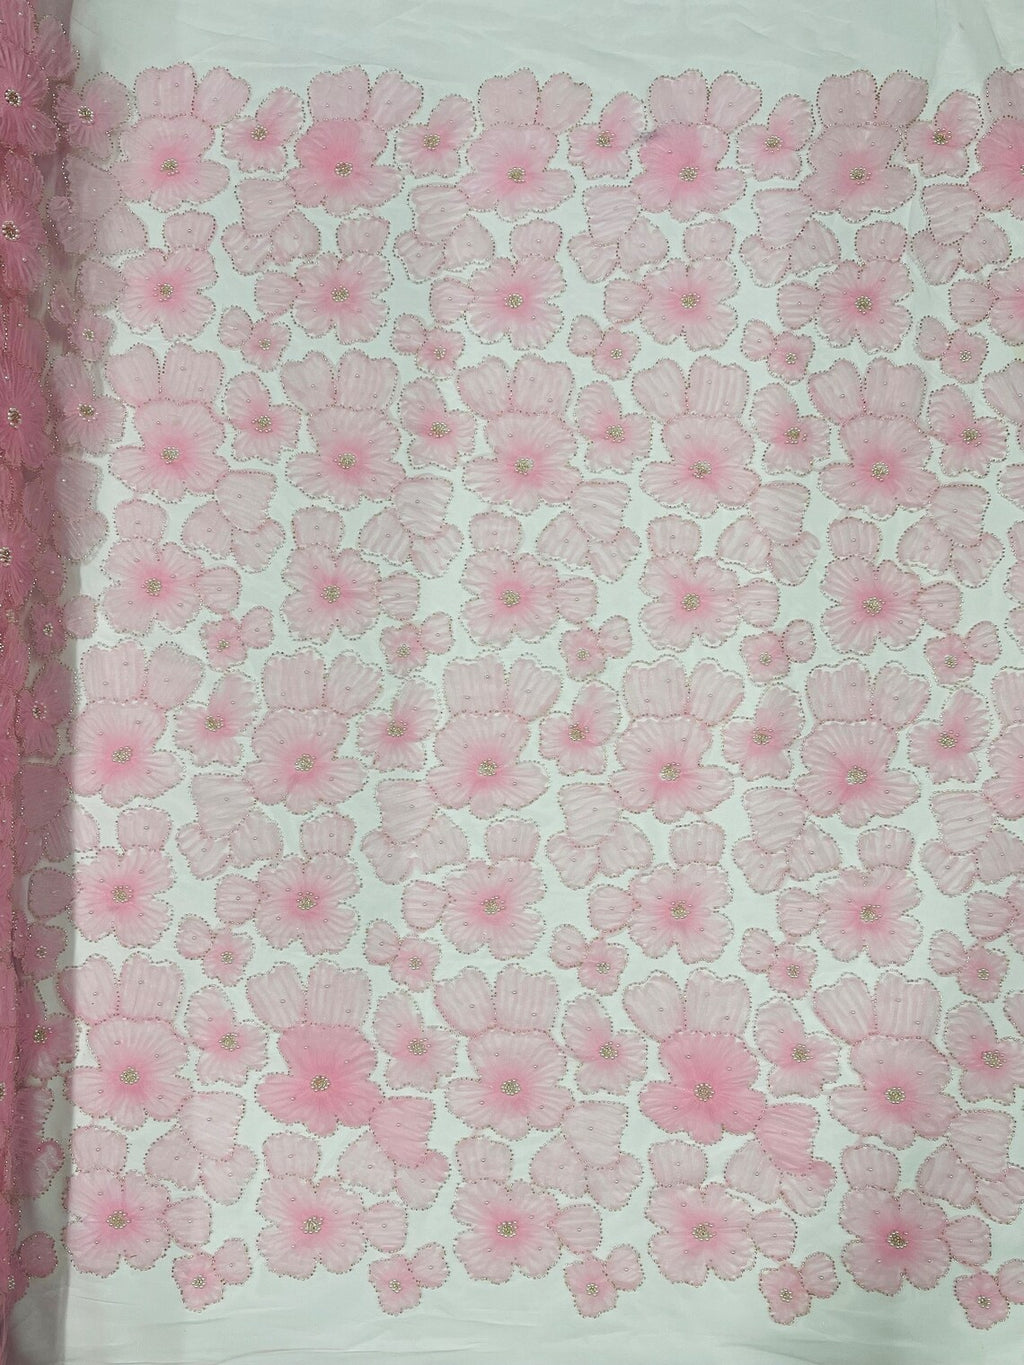 Candy Pink Felt Fabric - by The Yard